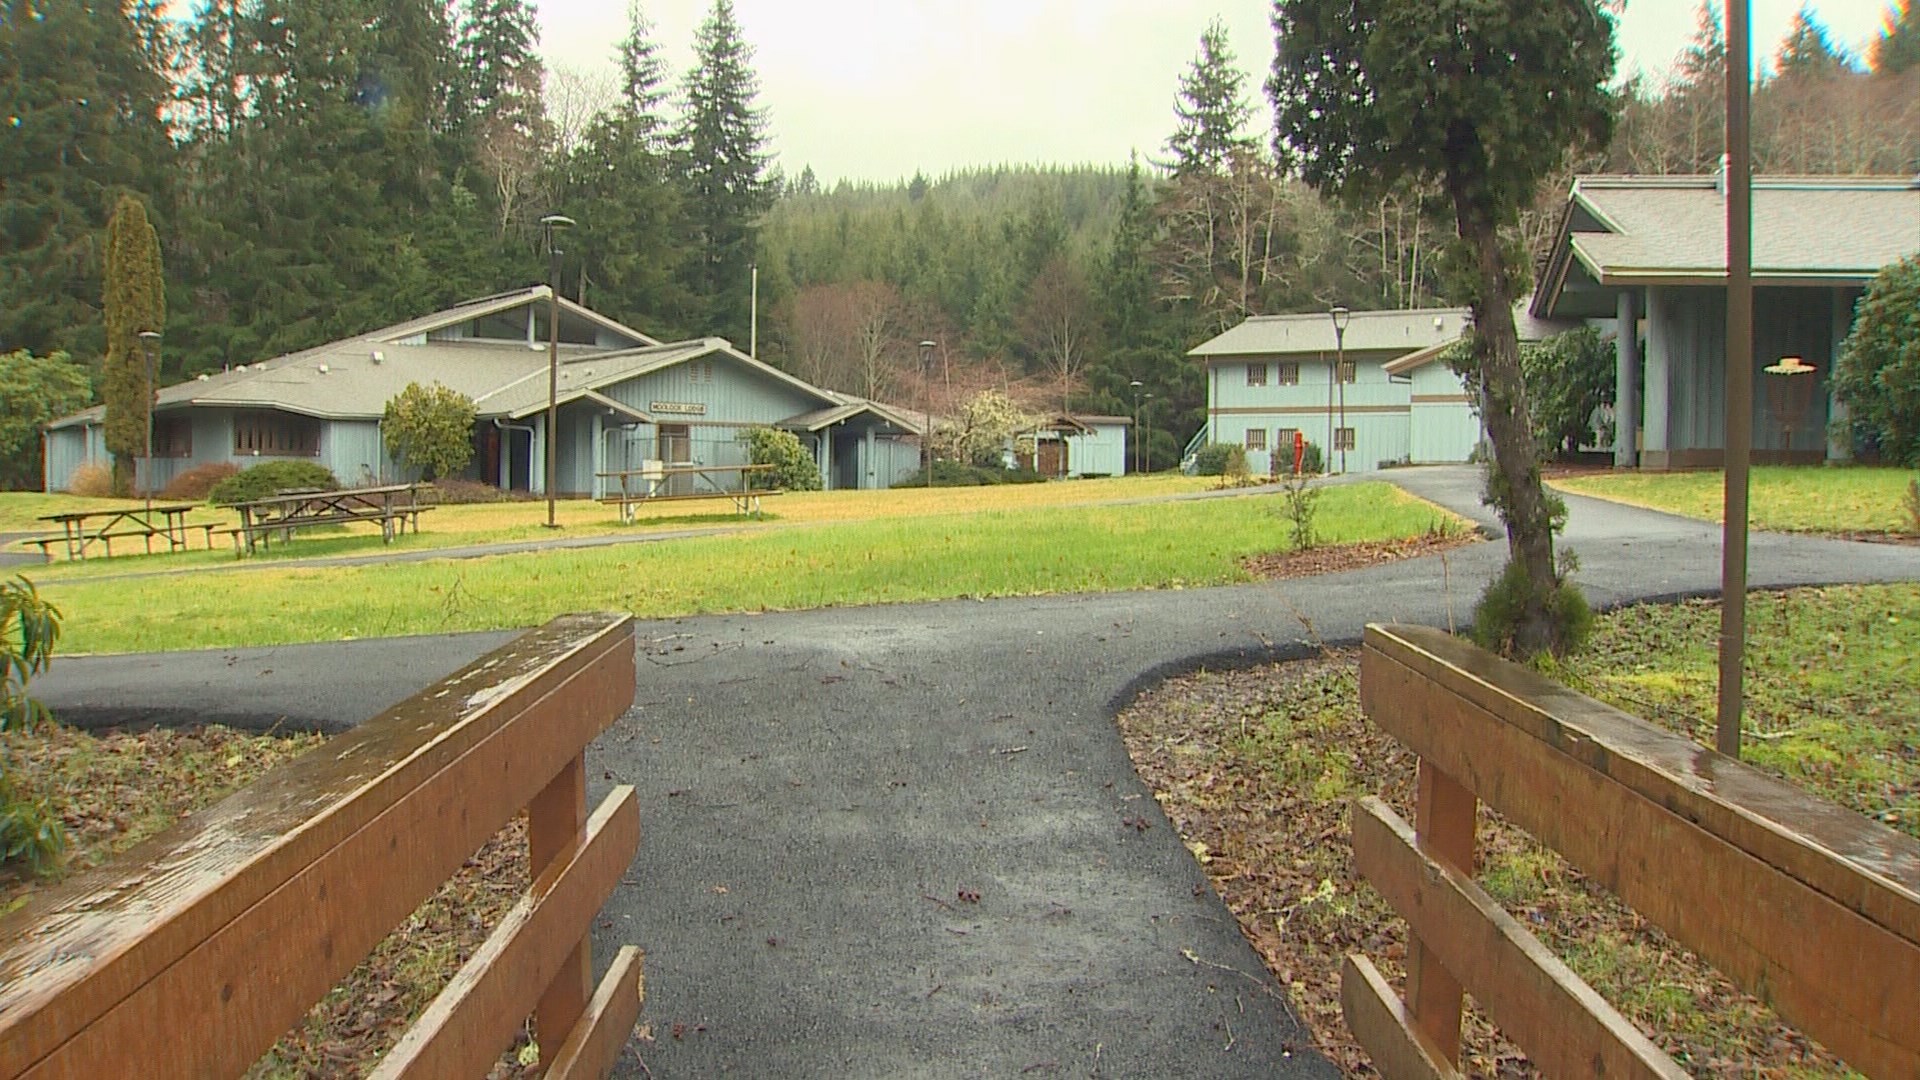 king5.com | Closing Naselle Youth Camp would hurt economy, boys, state Rep. says